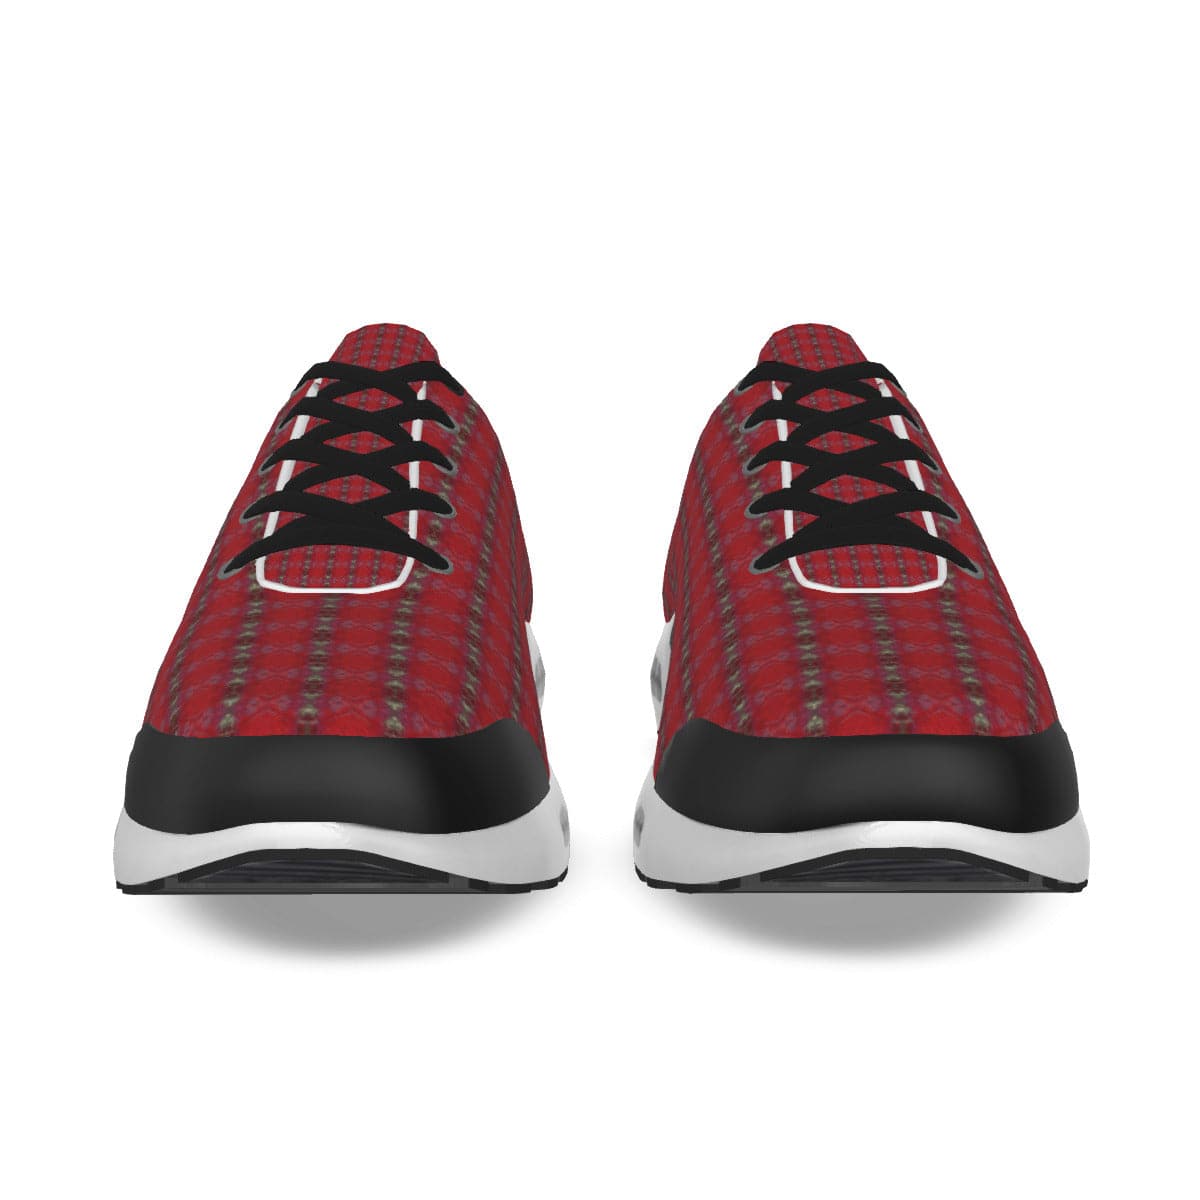 Wine Red and Olive green patterned Stylish Men's Air Cushion Sports Shoes, by Sensus Studio Design